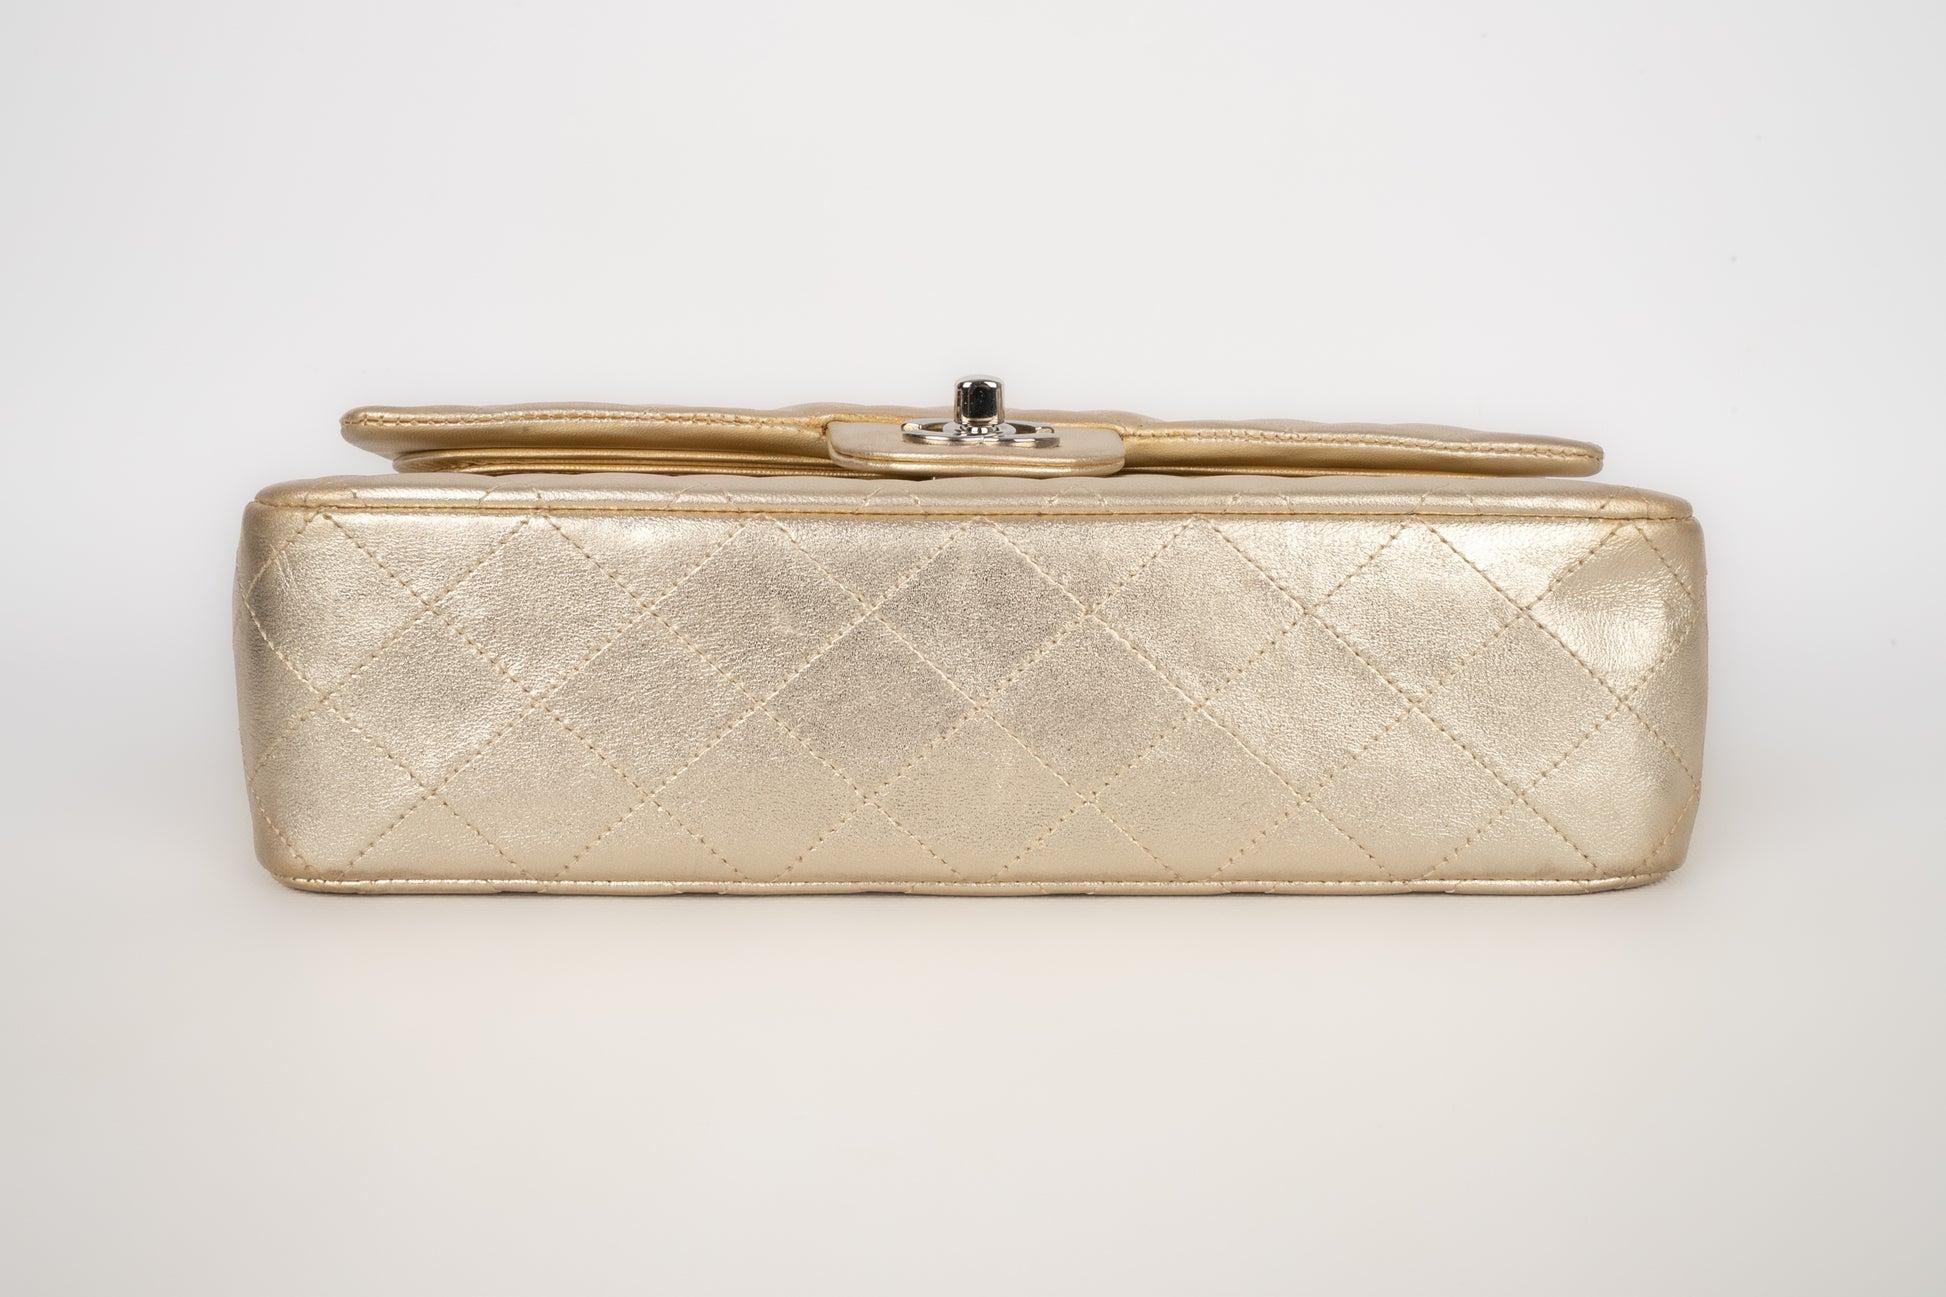 Chanel Timeless Pale-Golden Metallic Lamb Leather Classic Bag, 2006/2008 For Sale 1